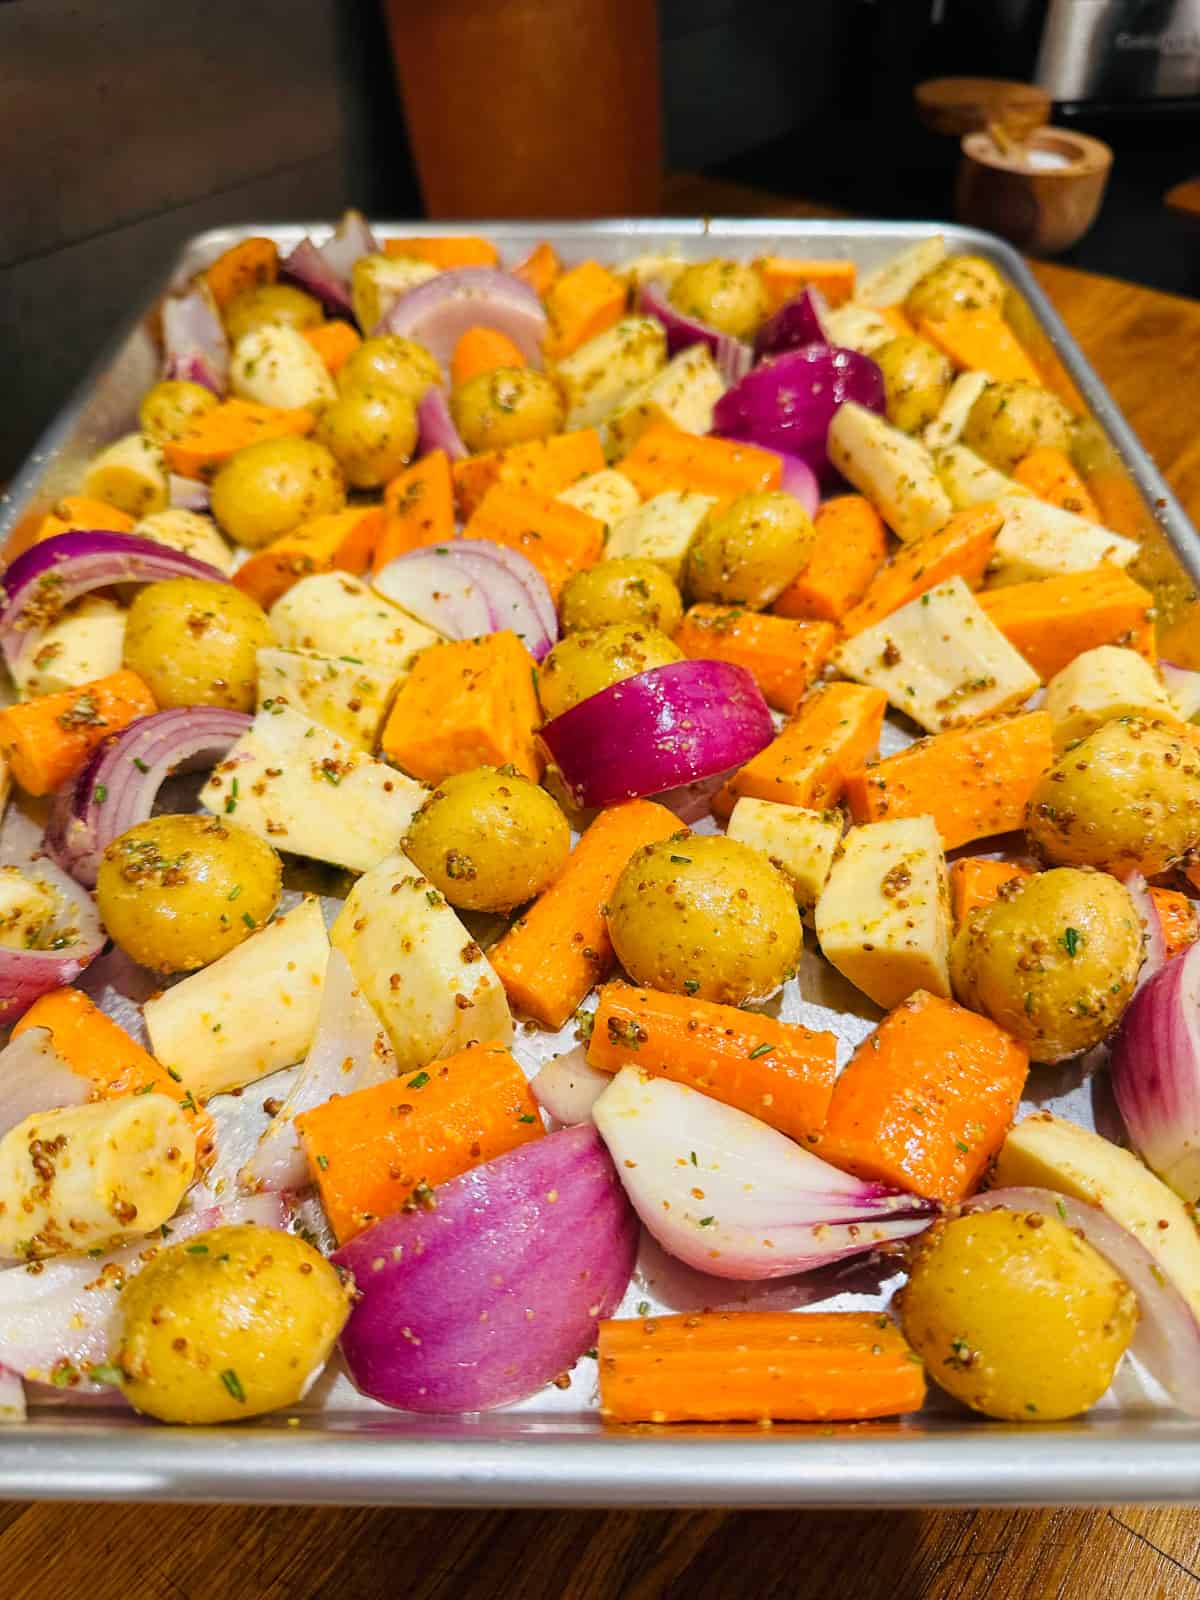 Mixed root vegetables coated with chicken seasoning and spread out on a baking sheet.